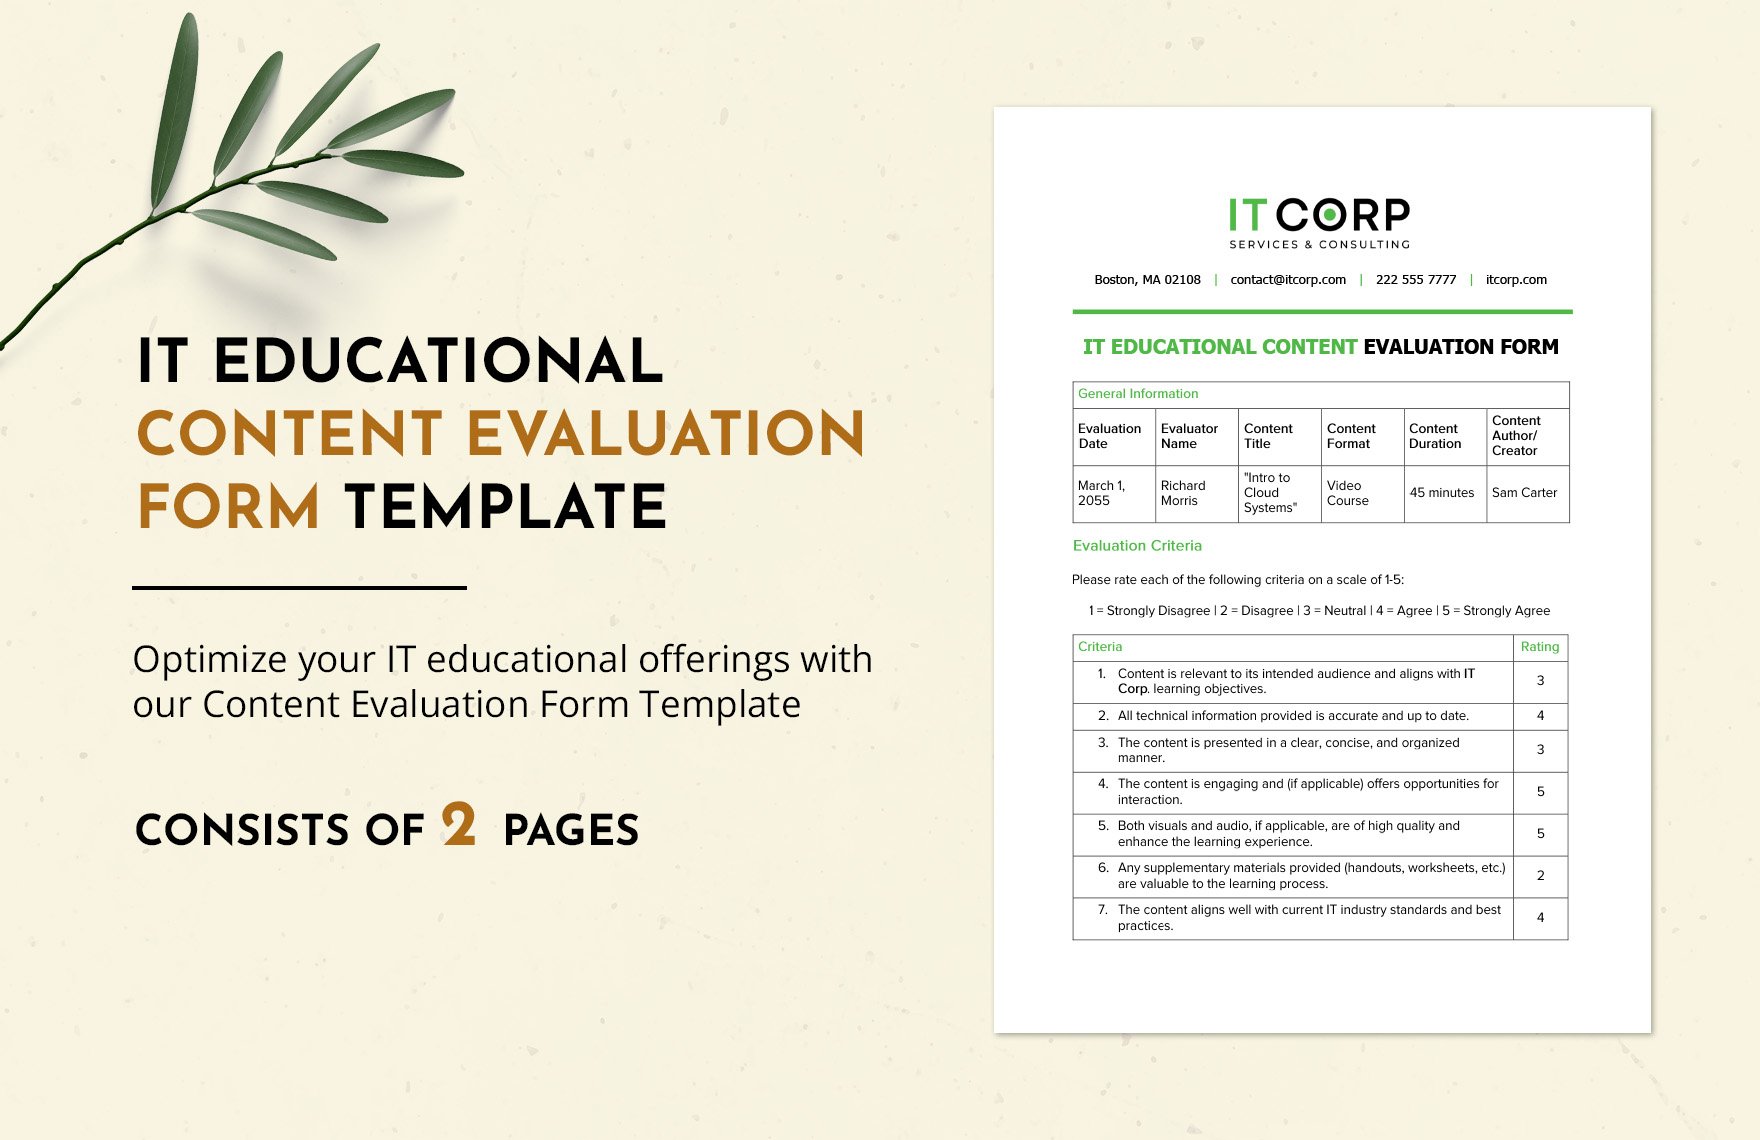 IT Educational Content Evaluation Form Template